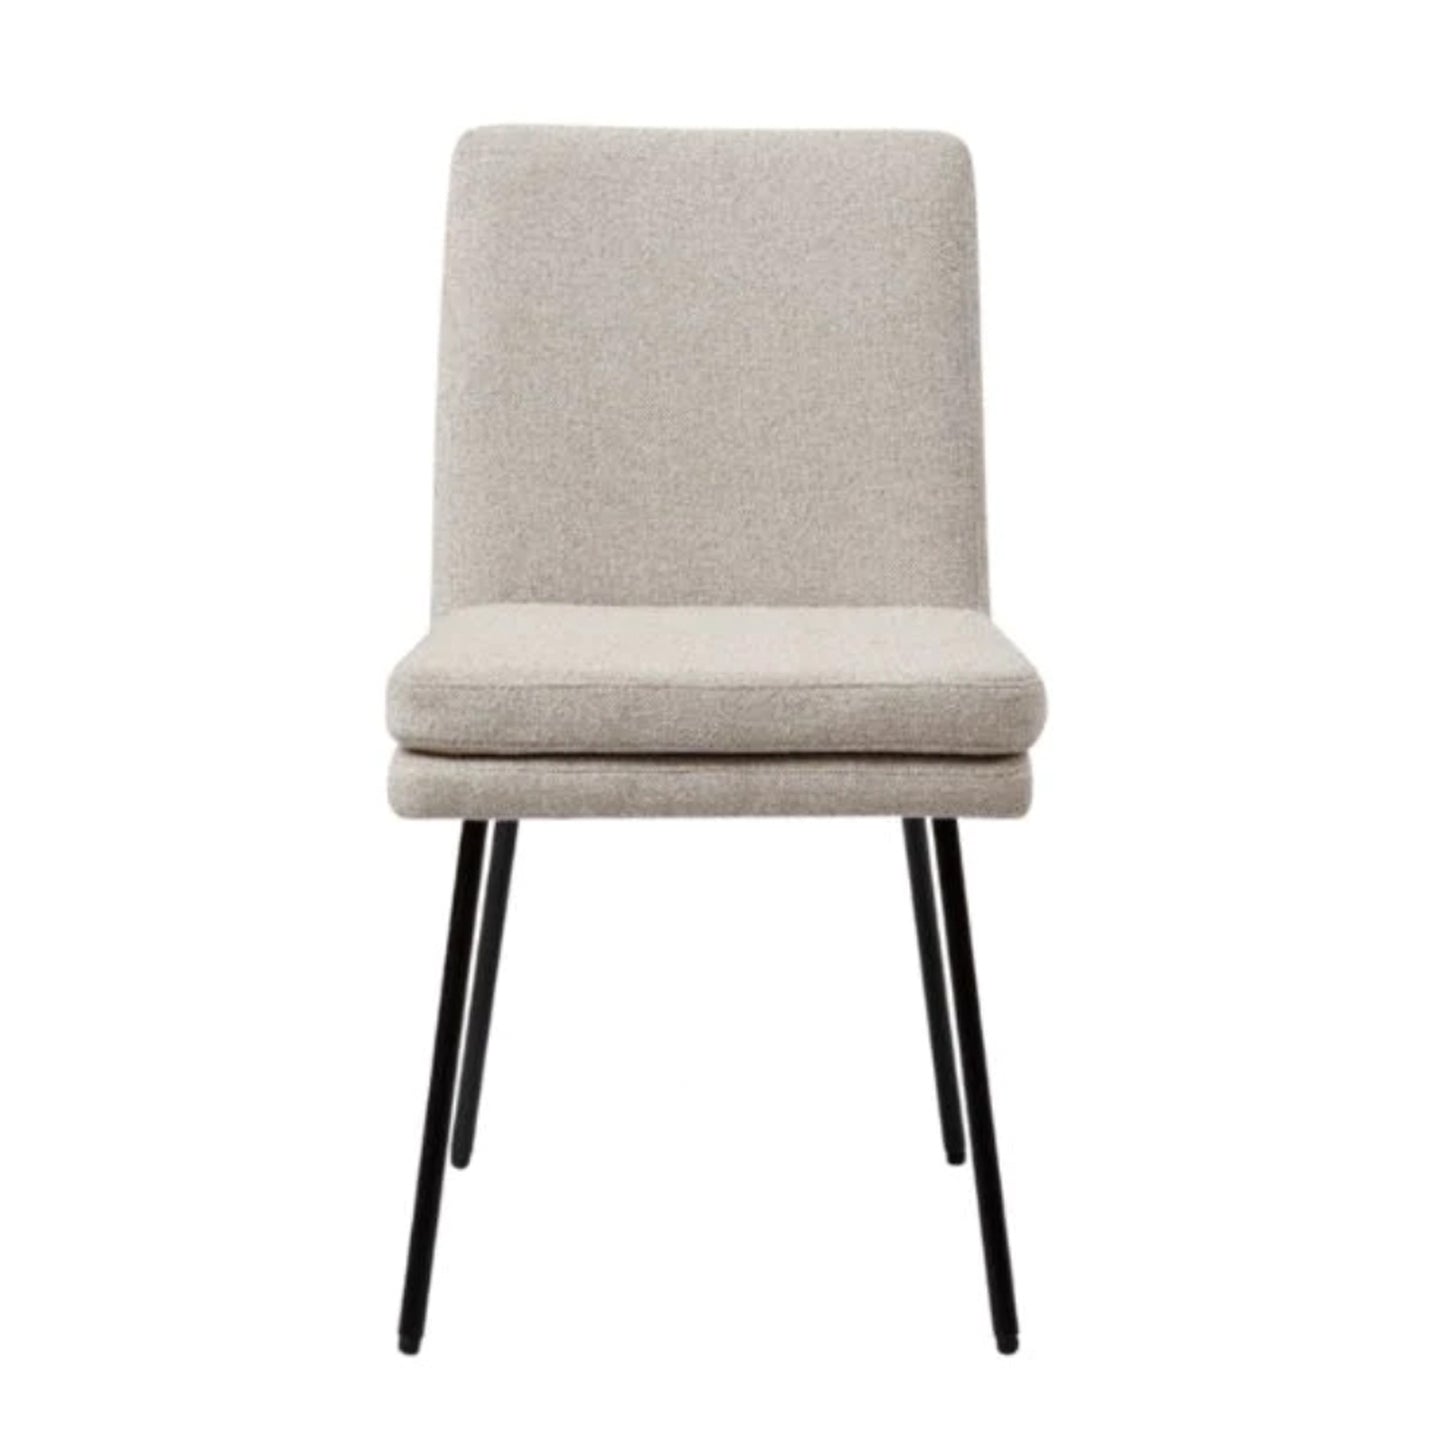 Beige Woven Dining Chair With Black Legs